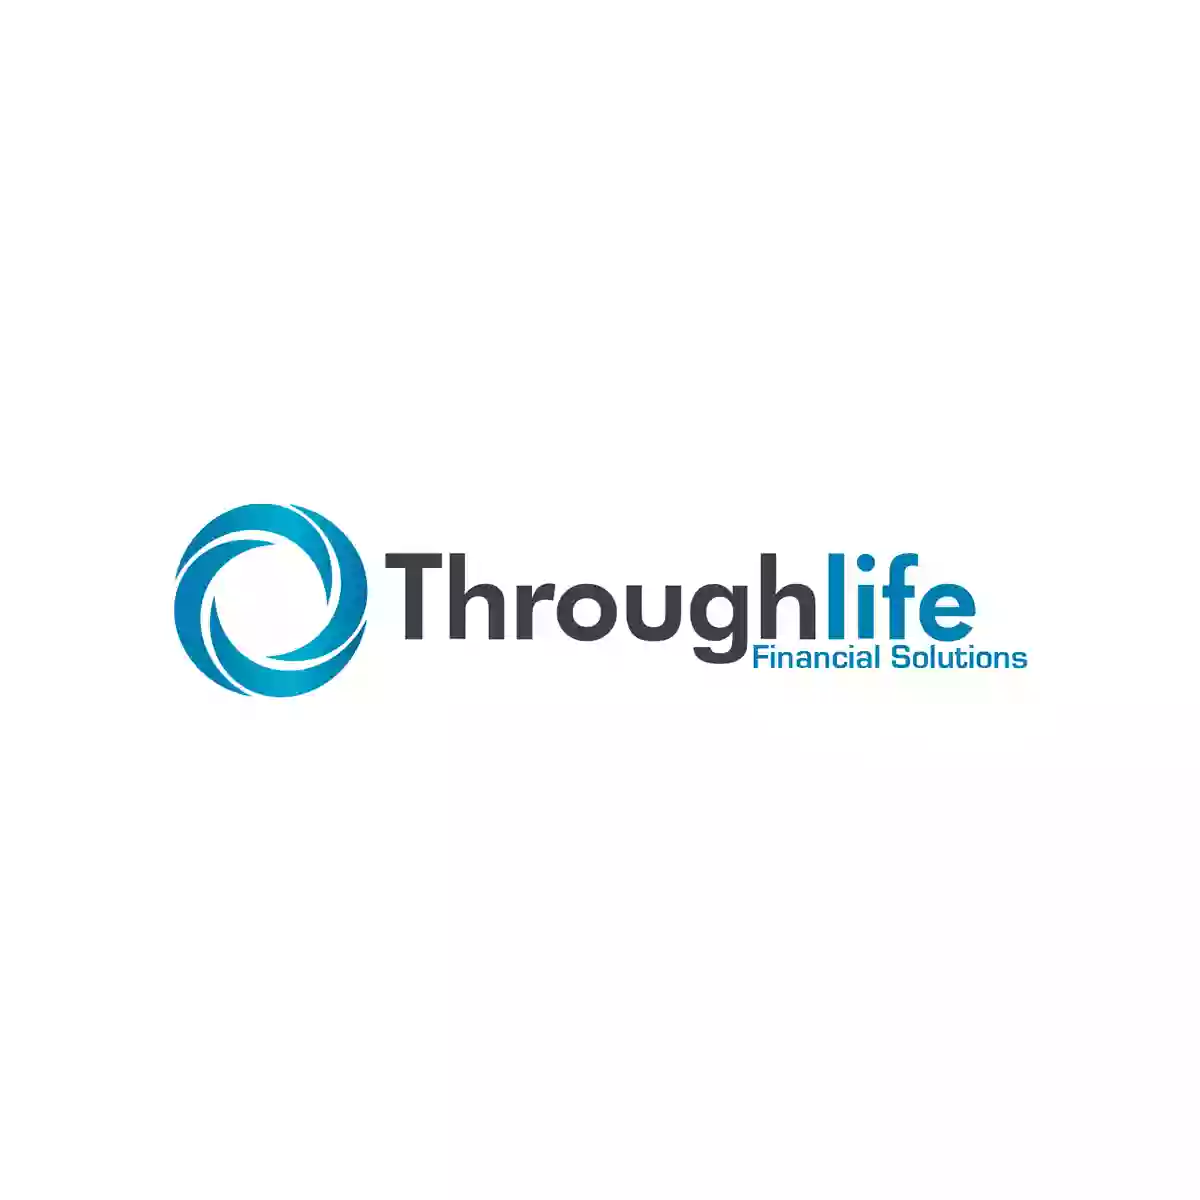 Throughlife Financial Solutions